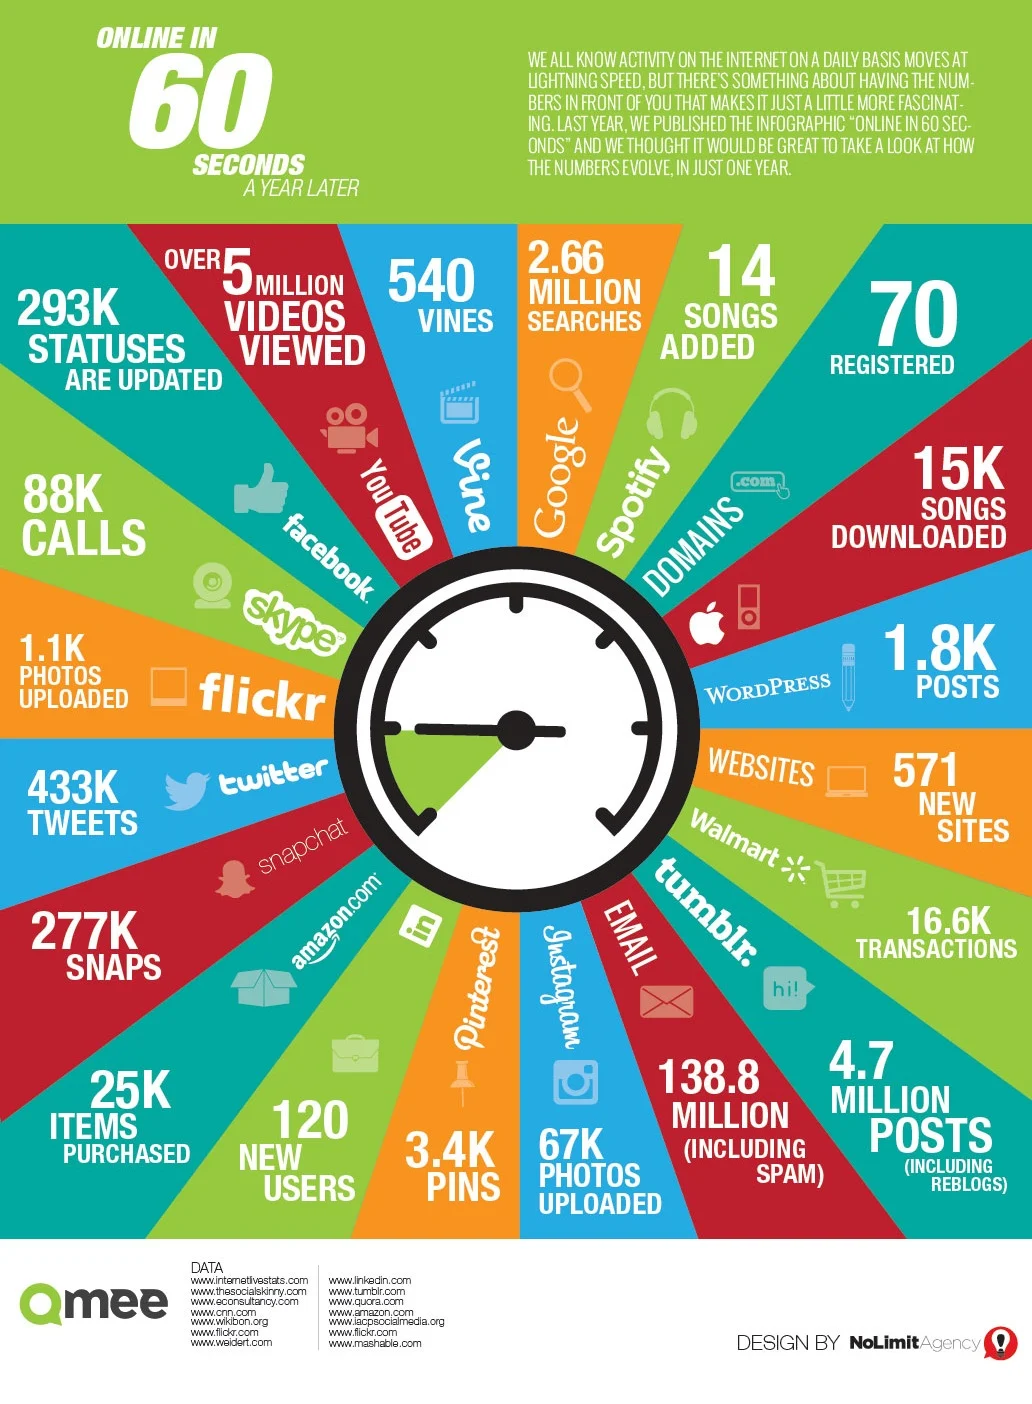 What Happens Every 60 Seconds Online